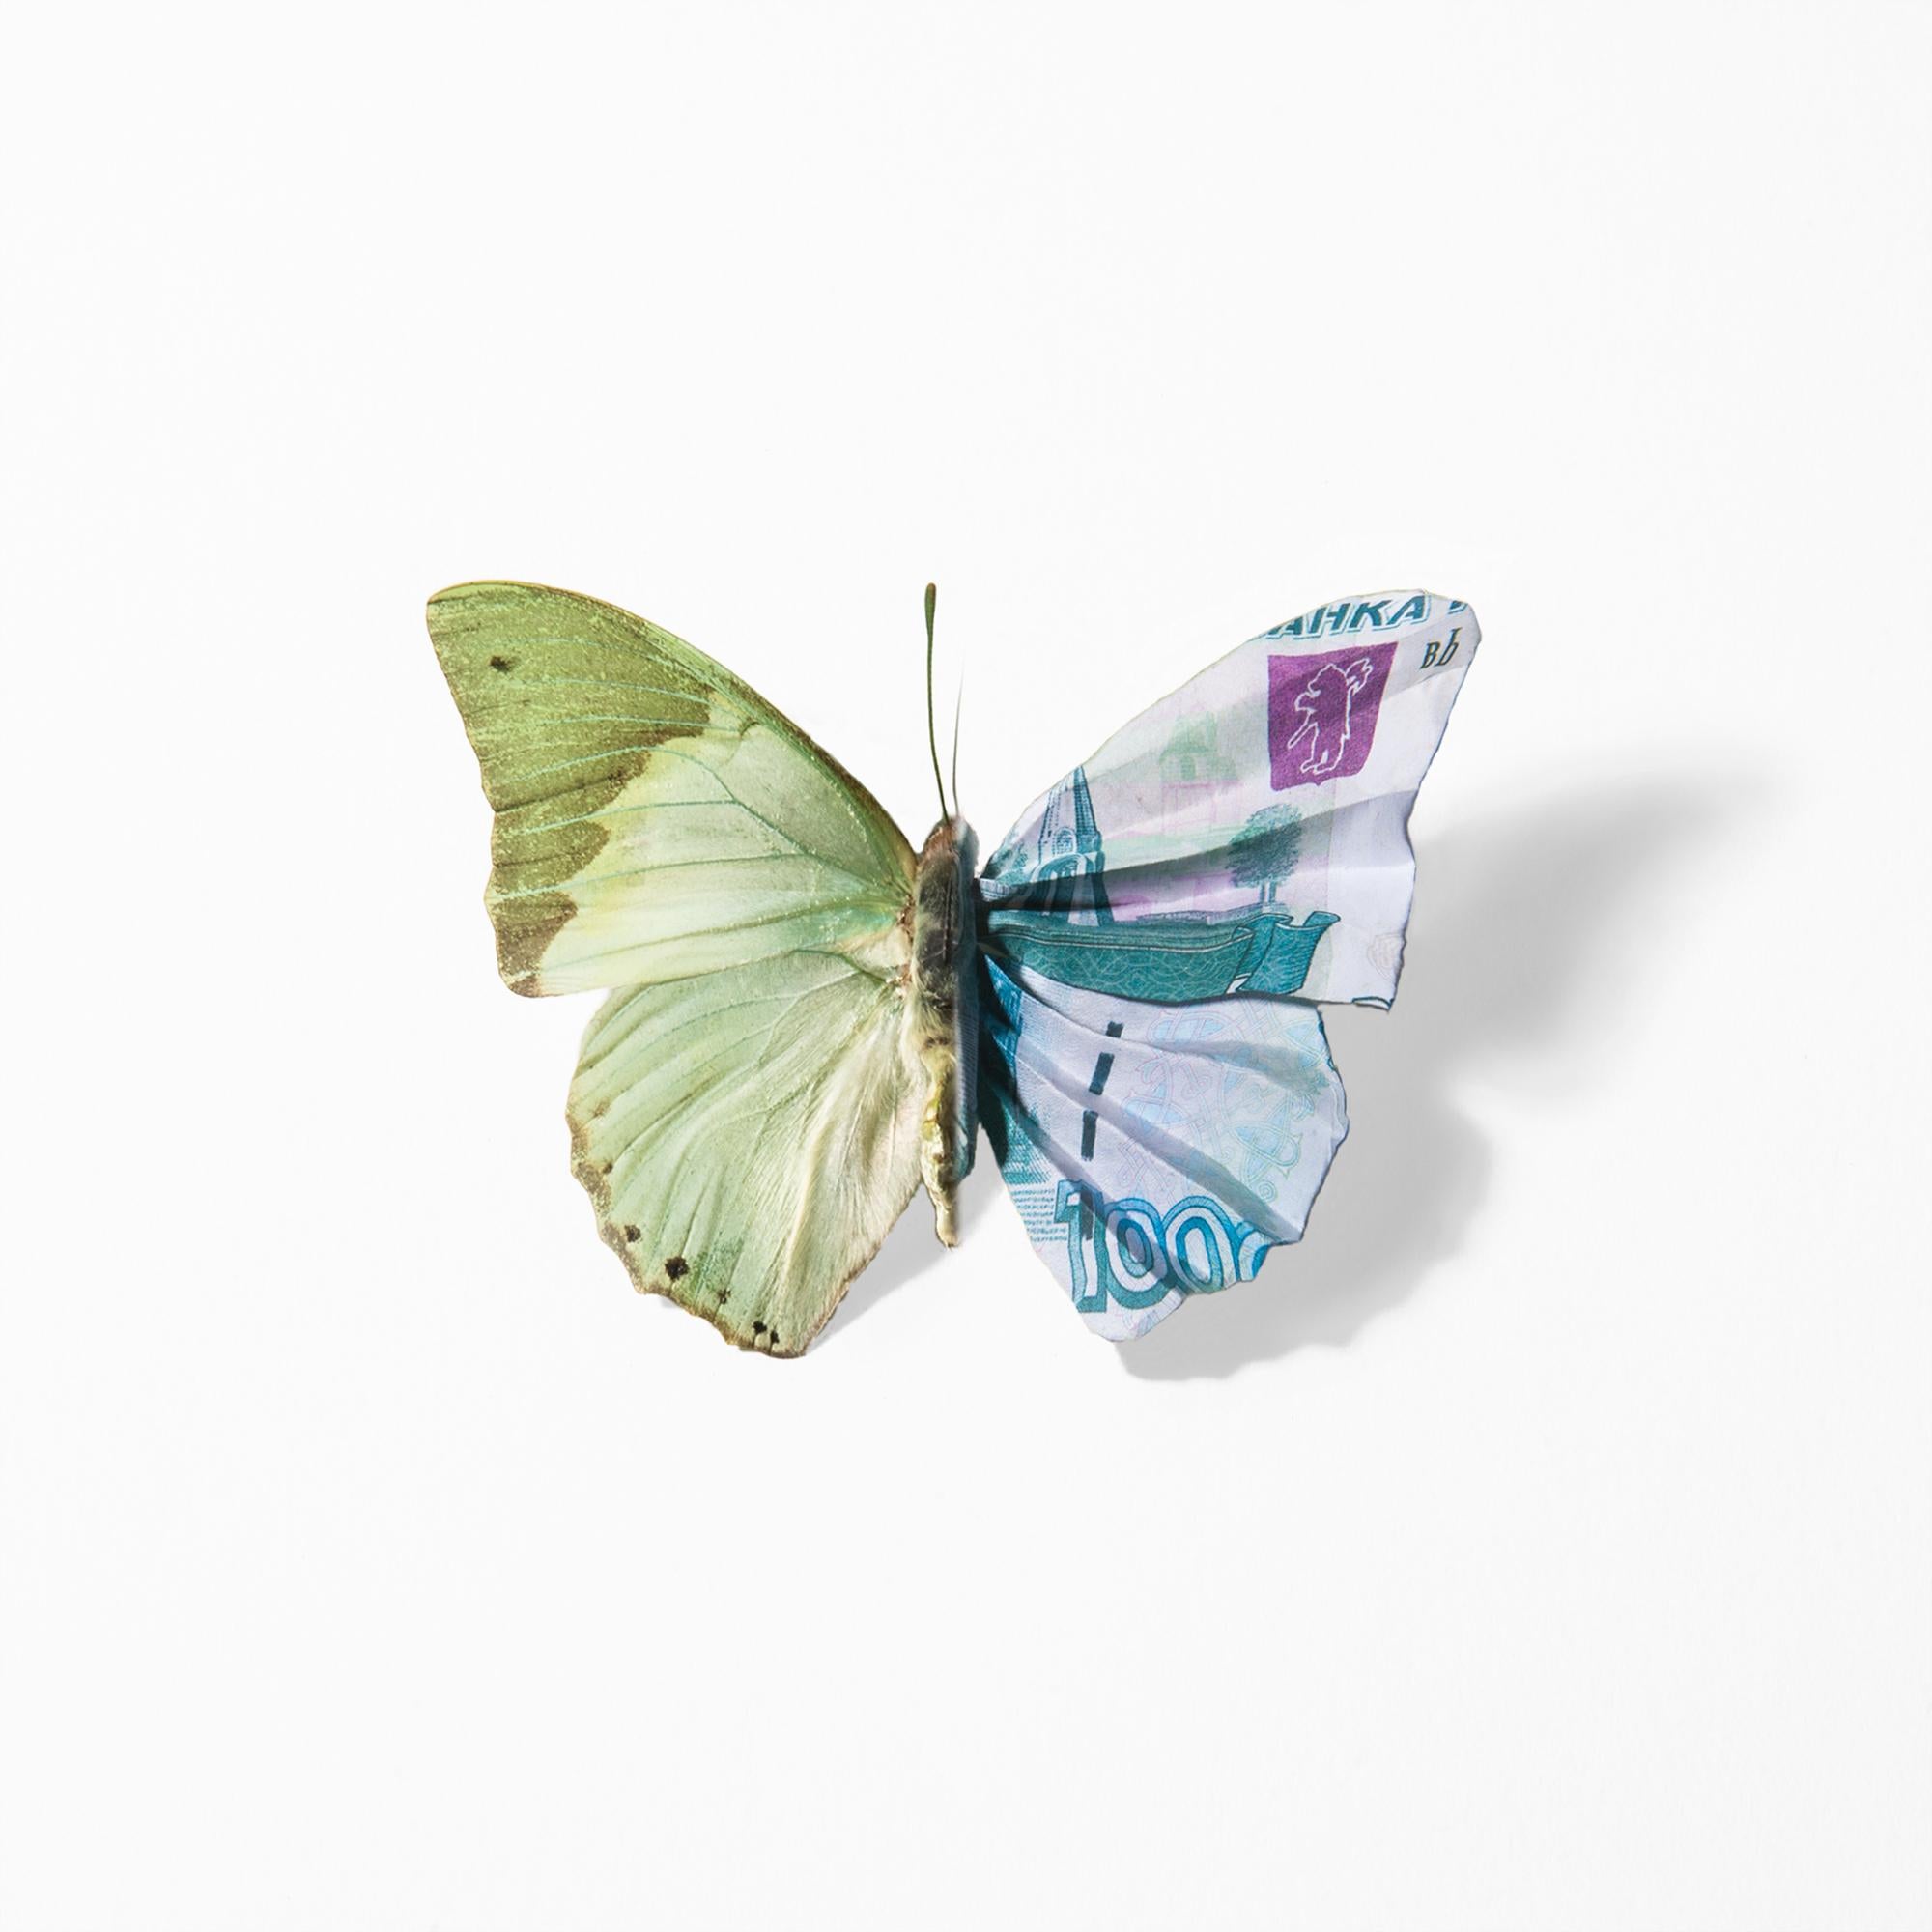 Anna Tas Still-Life Photograph - "A Thing of Beauty #7 (Charaxes)" Lenticular transition Butterfly to Currency